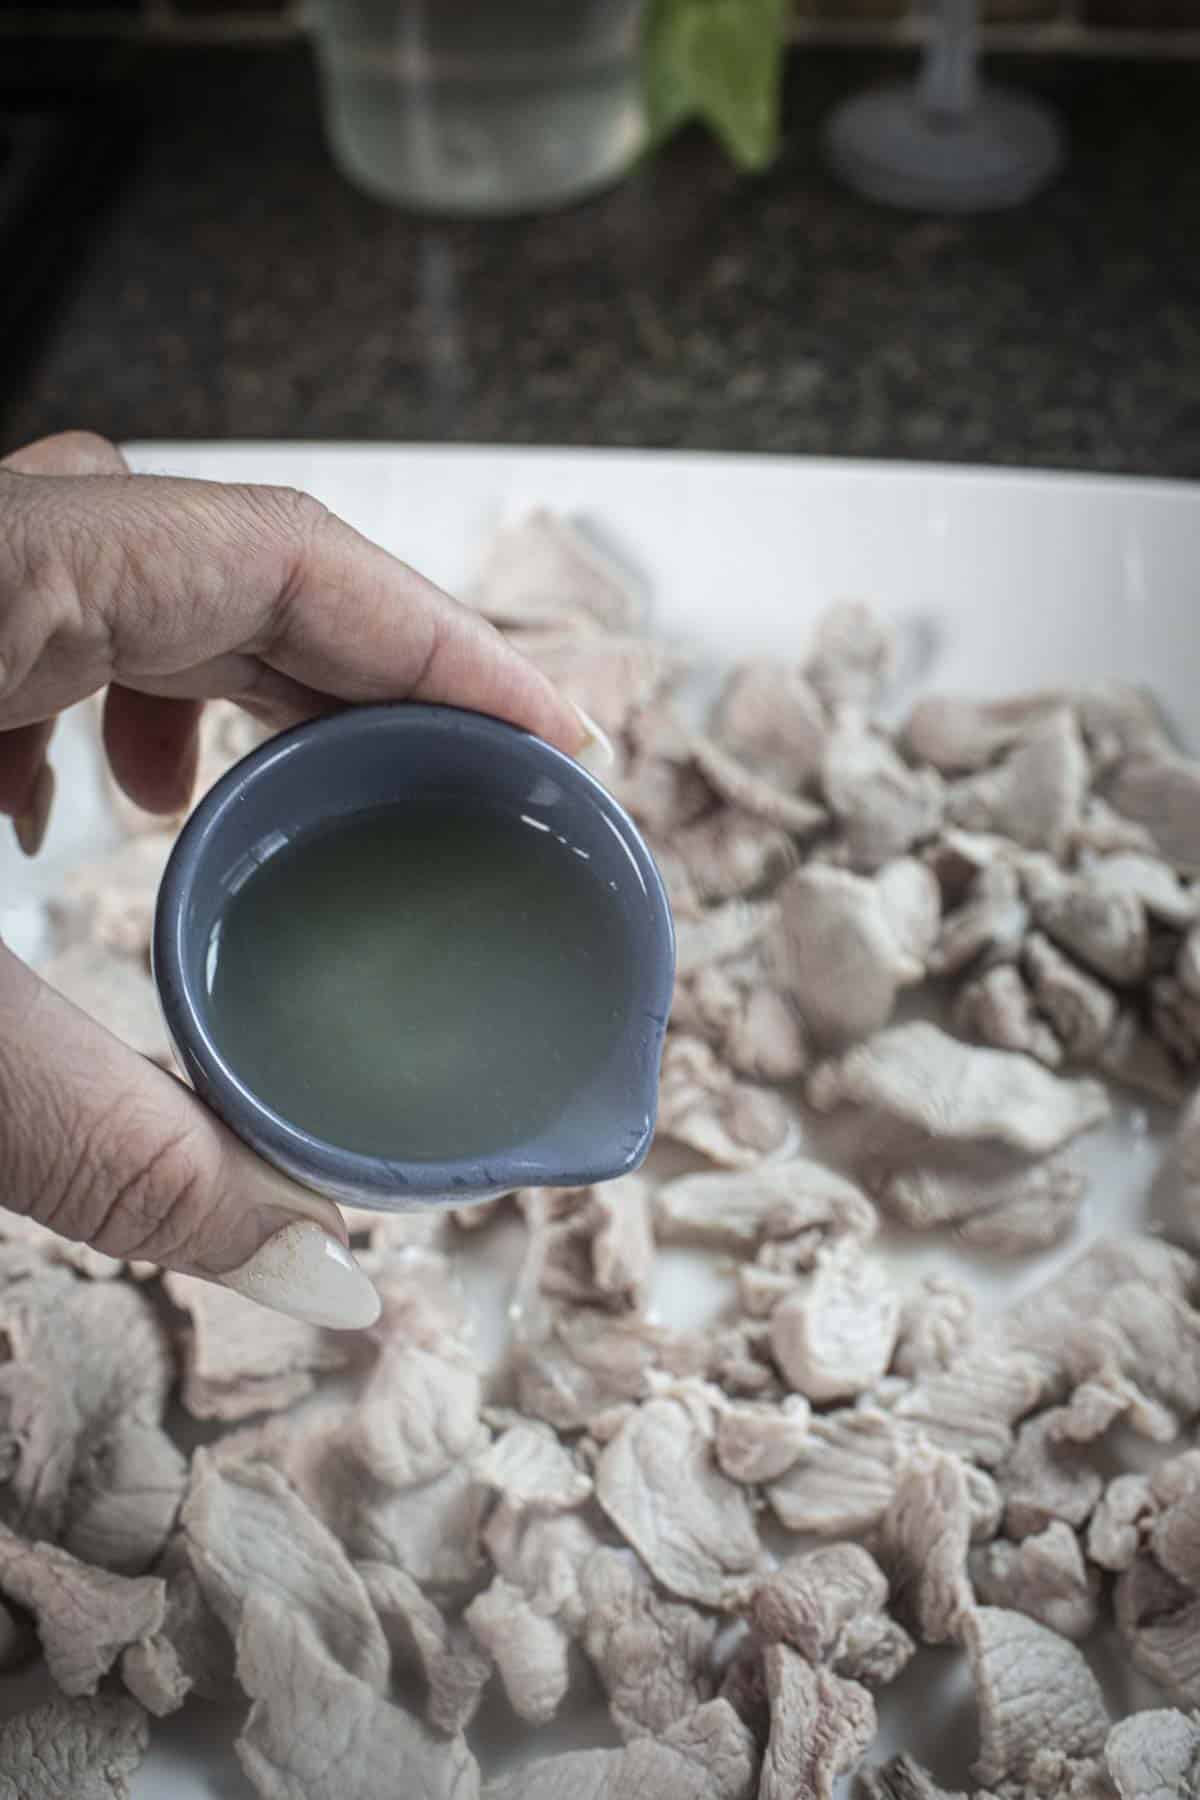 Lime juice pouring over pork slices on a white plate.